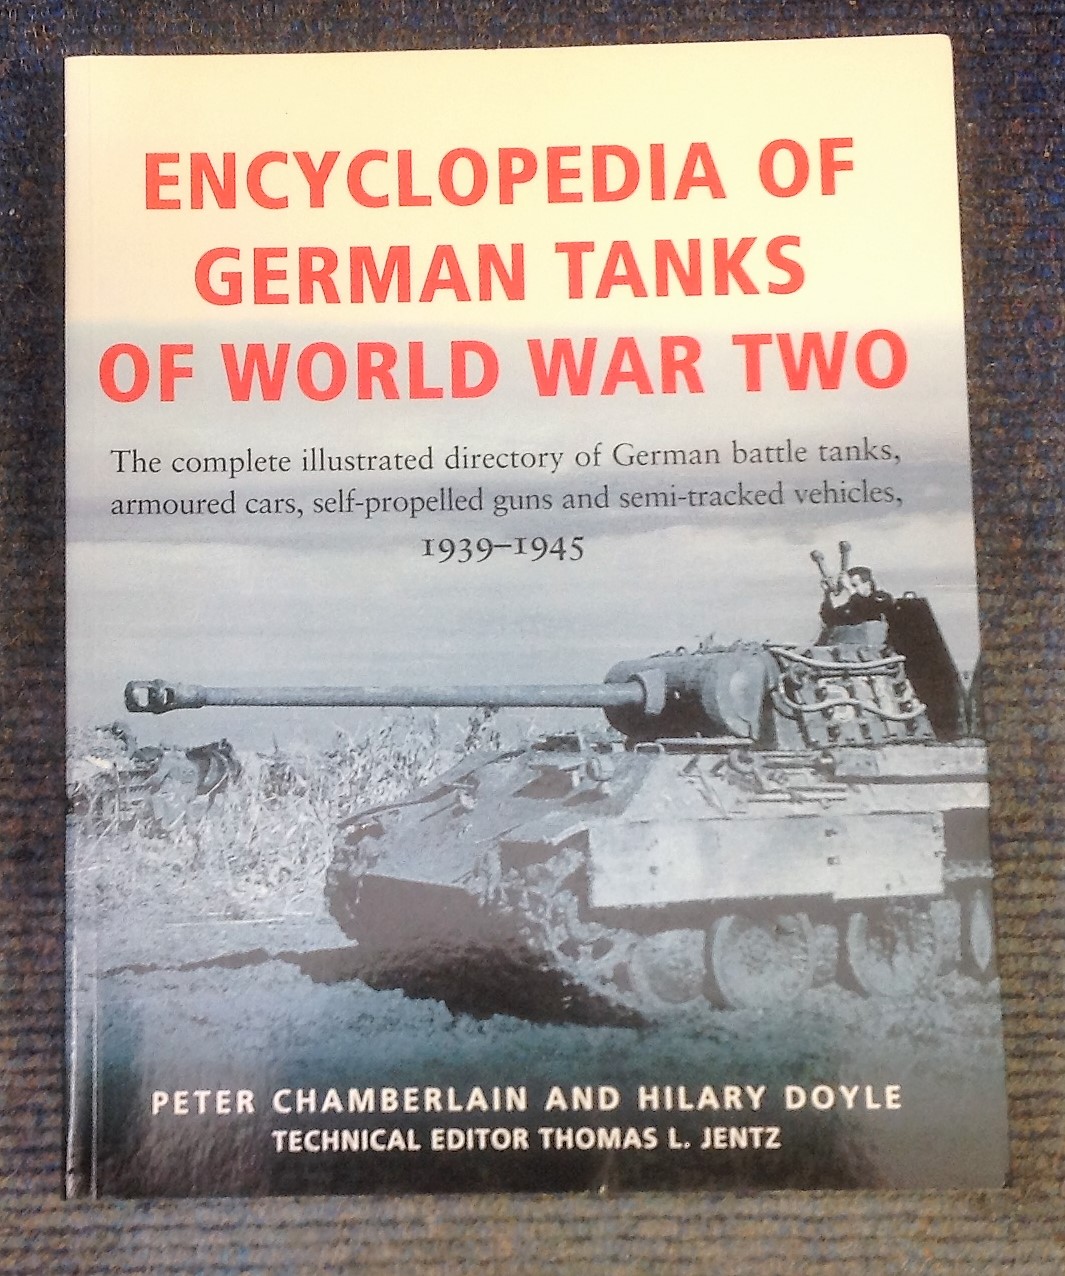 An Encyclopaedia of German Tanks of World War Two by Peter Chamberlain and Hilary Doyle with